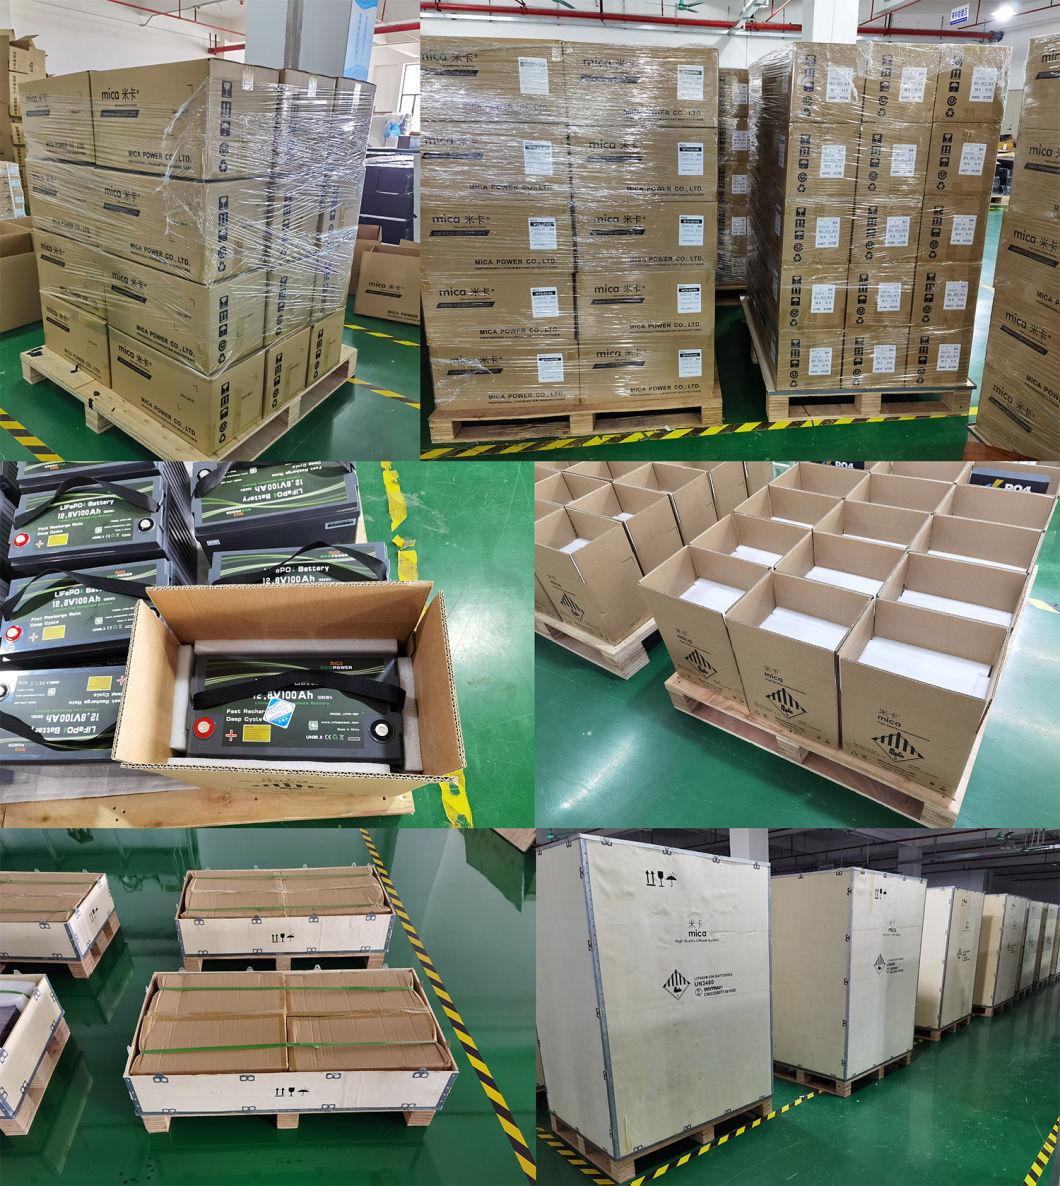 Customized 36V 9ah 12ah 16ah 20ah E-Bike Battery Rechargeable Over 1000 Times Lithium Phosphate Iron Battery for Electric Scooter Batterie Pour Voiture